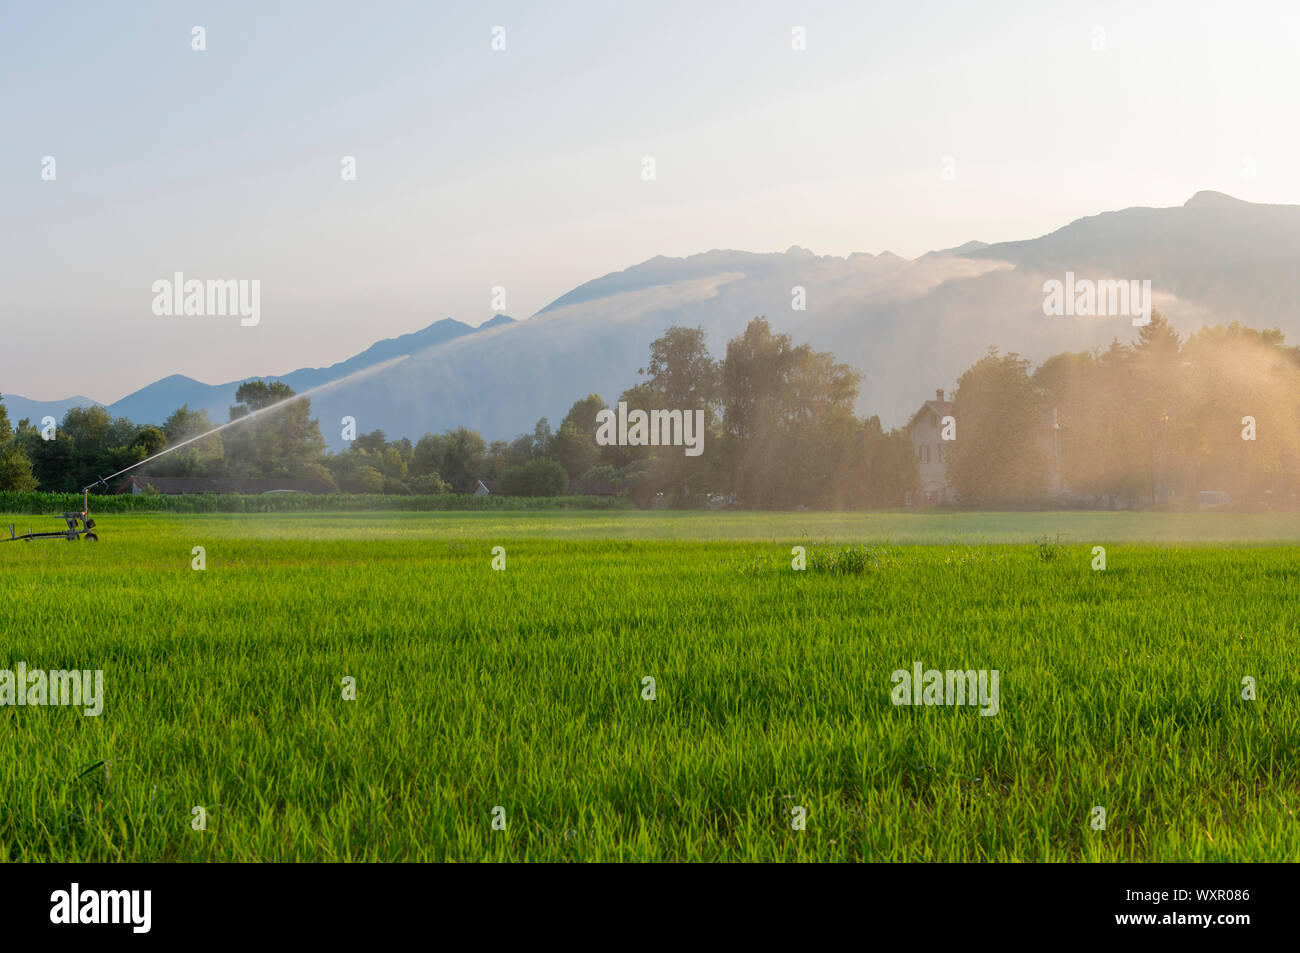 Water Sprinkler on Agriculture Field in Switzerland Stock Photo - Alamy